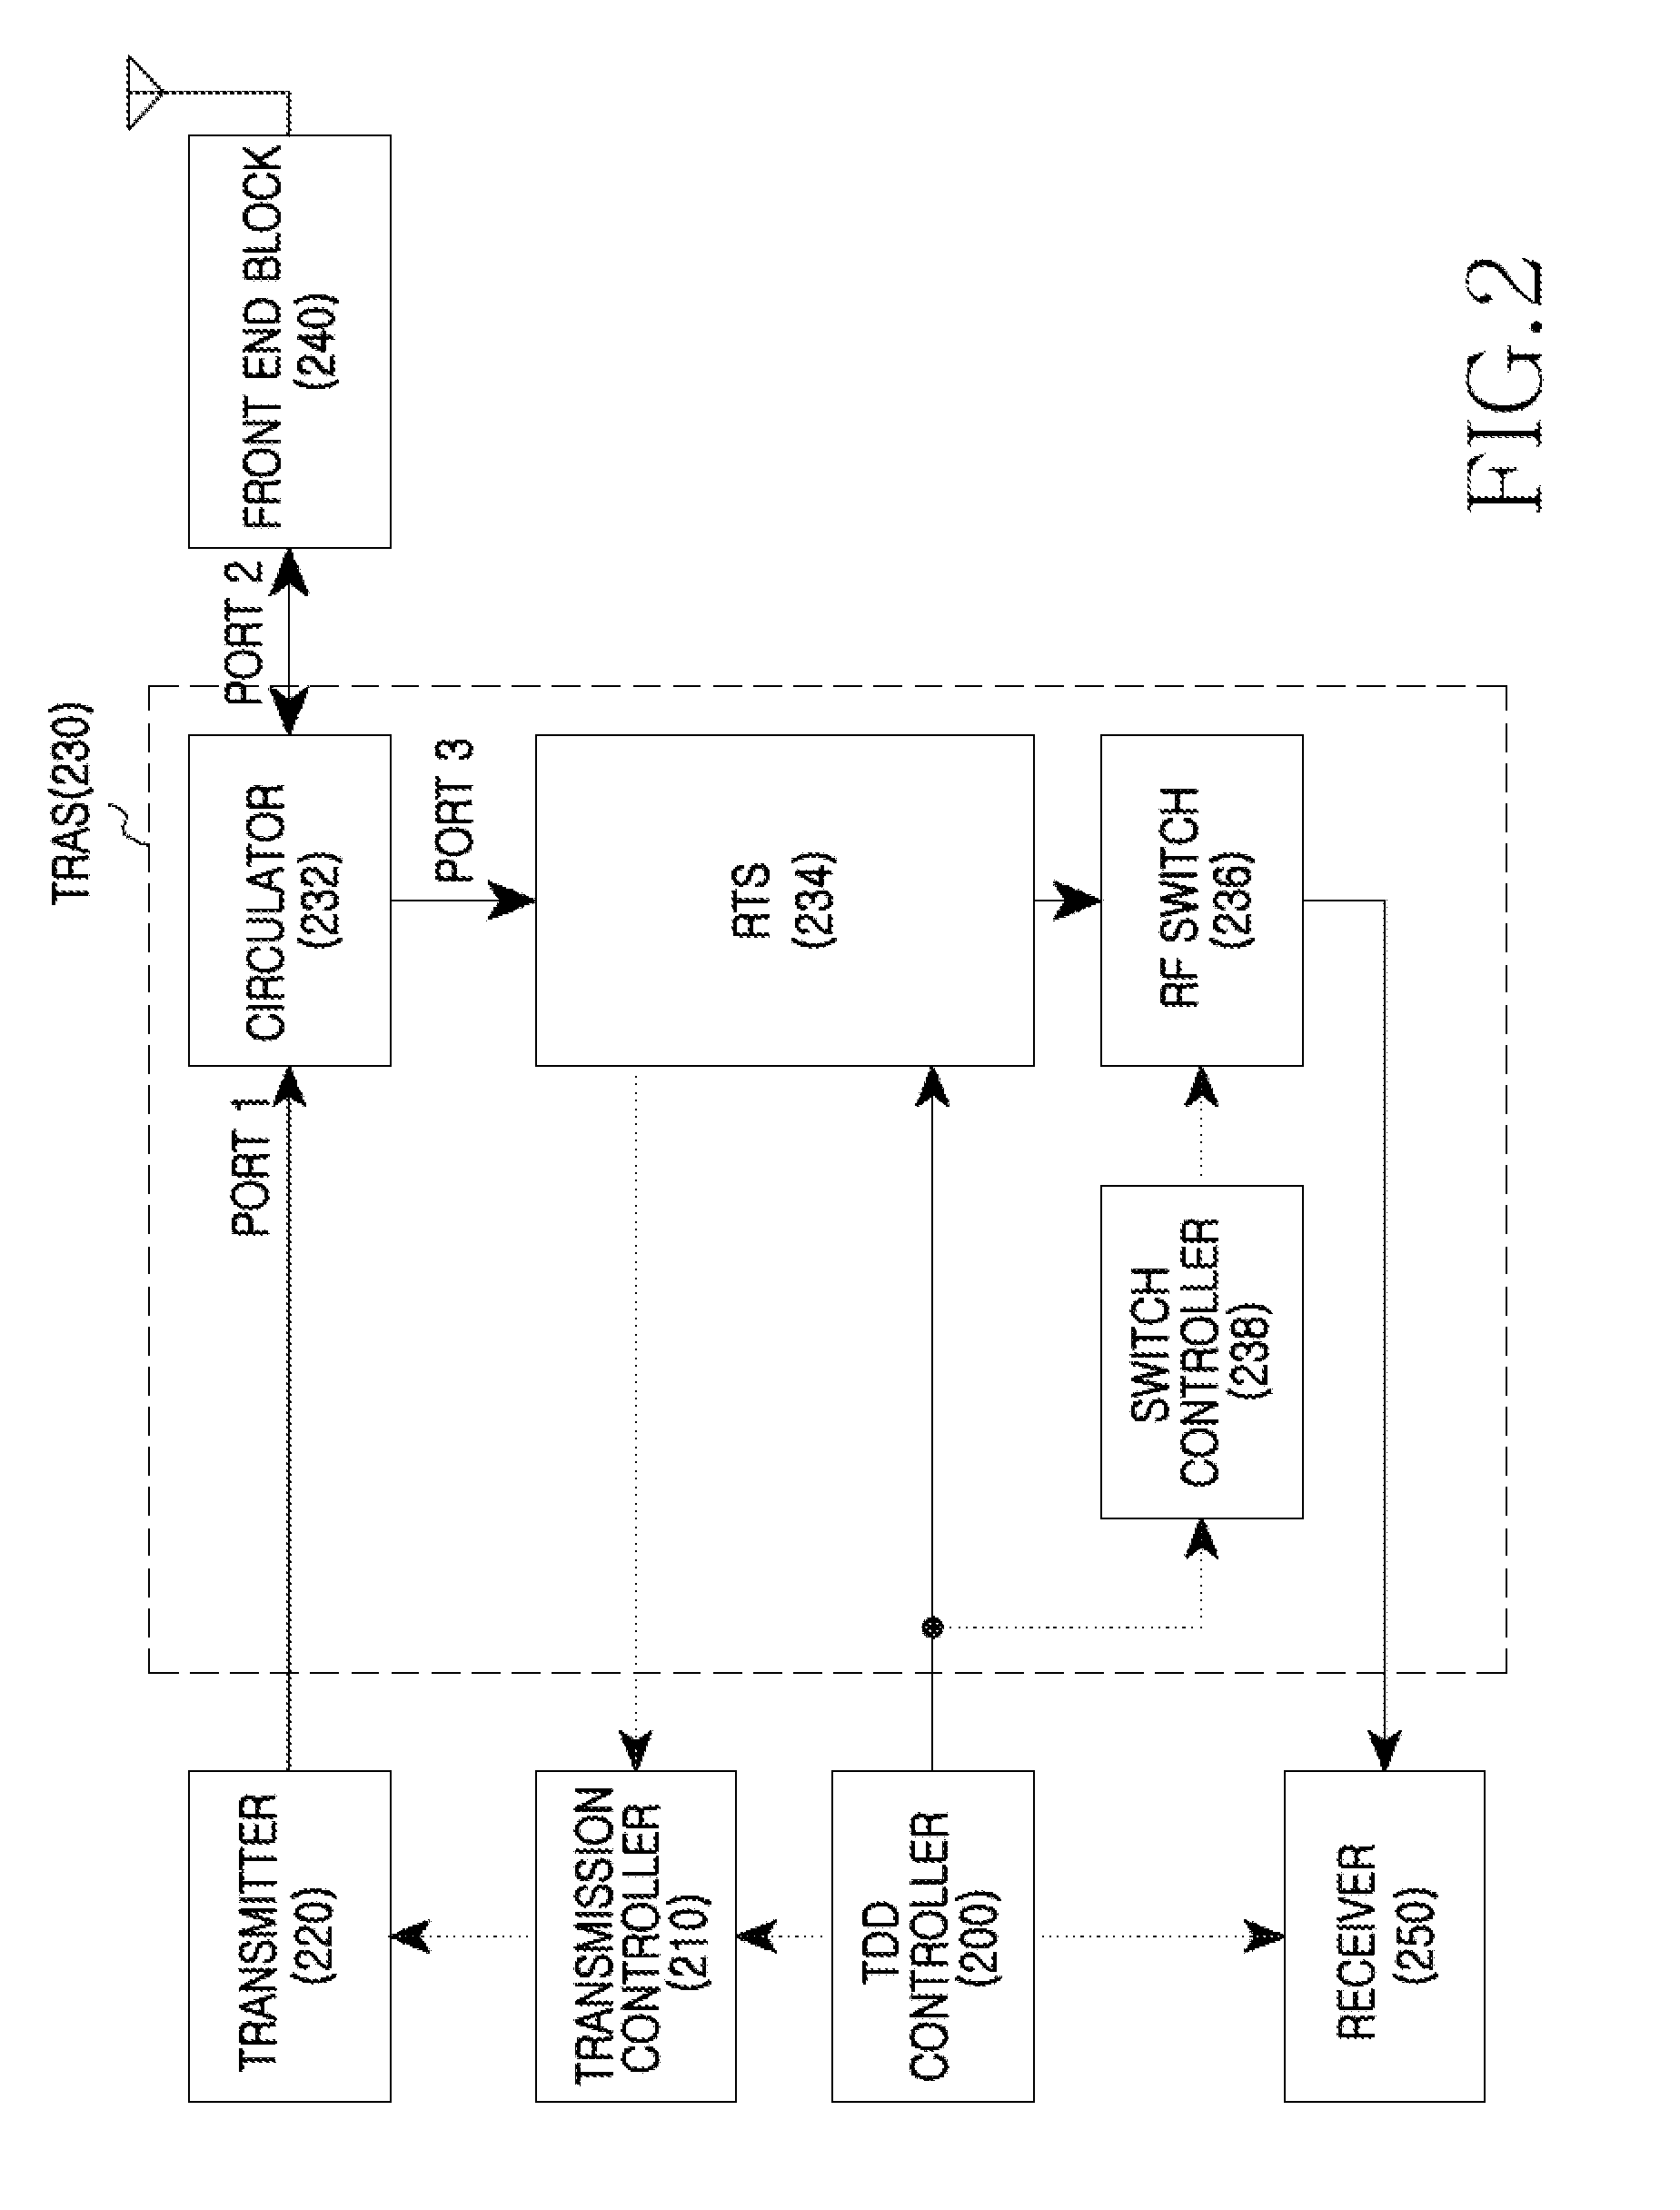 Apparatus and method for protecting receive circuits in TDD wireless communication system